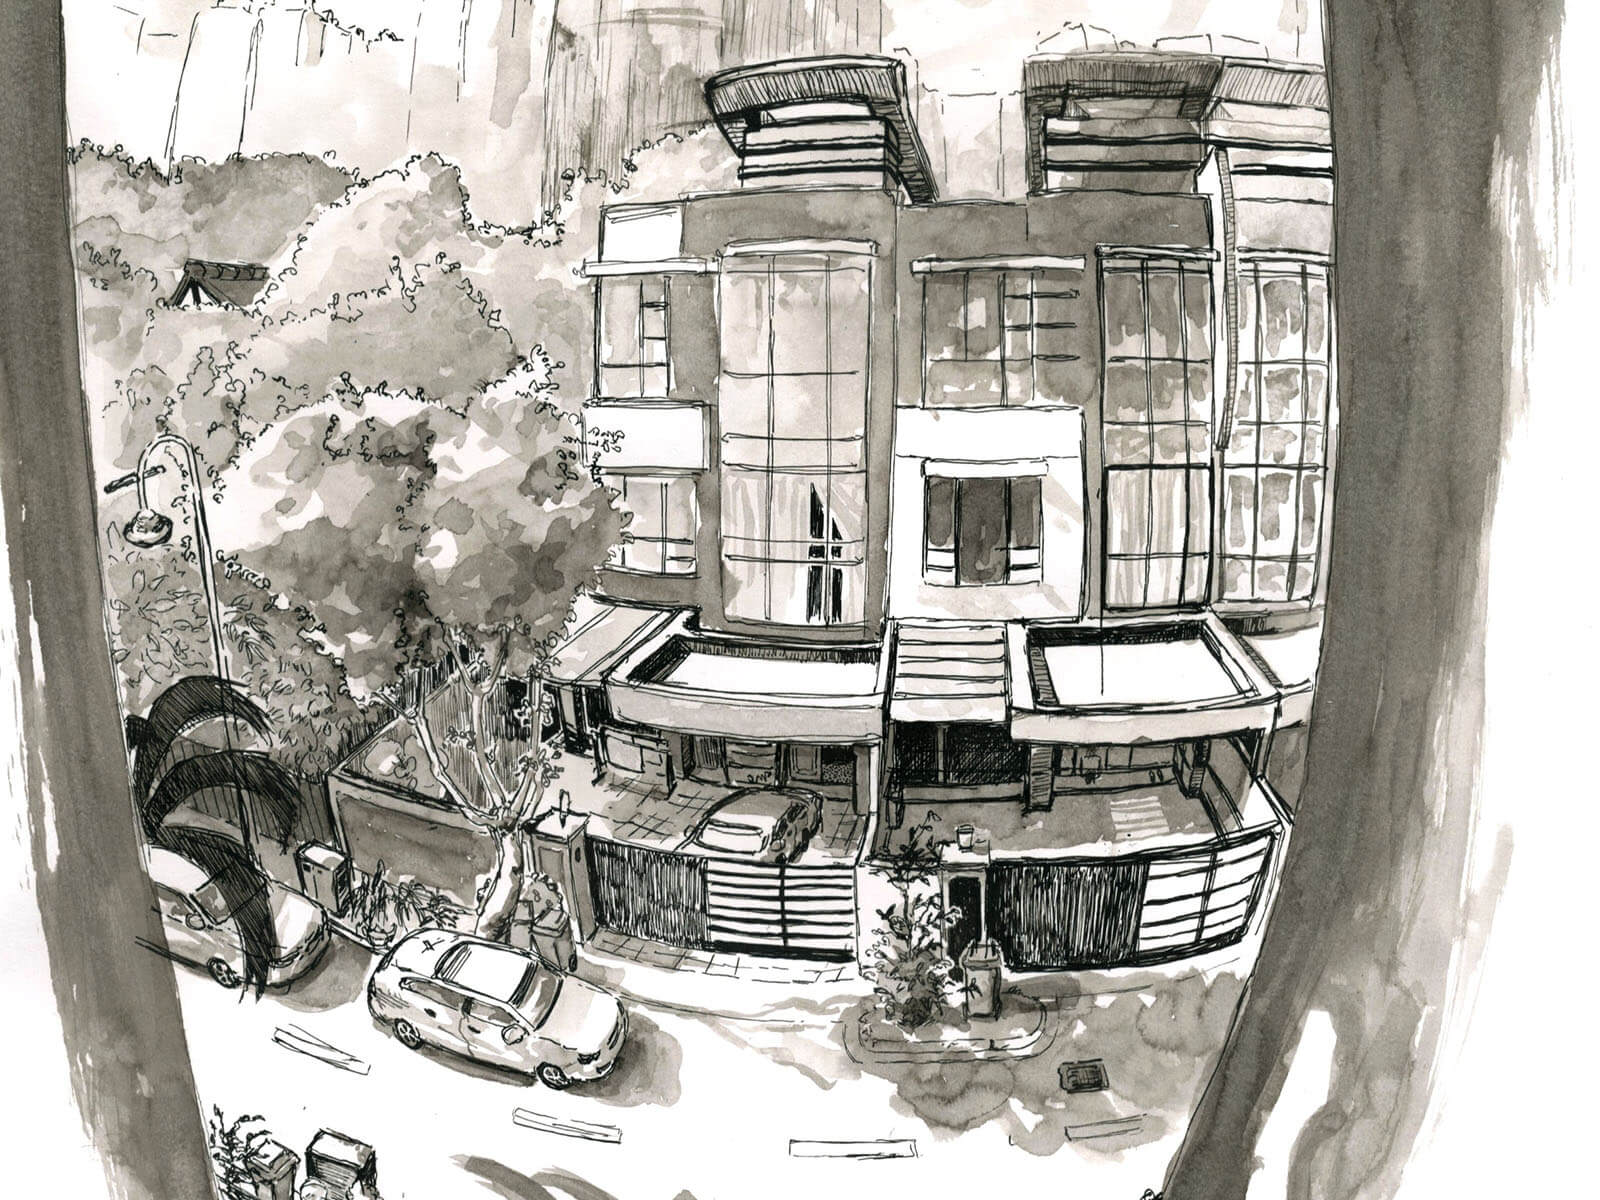 Black-and-White sketch of a home from across a street.